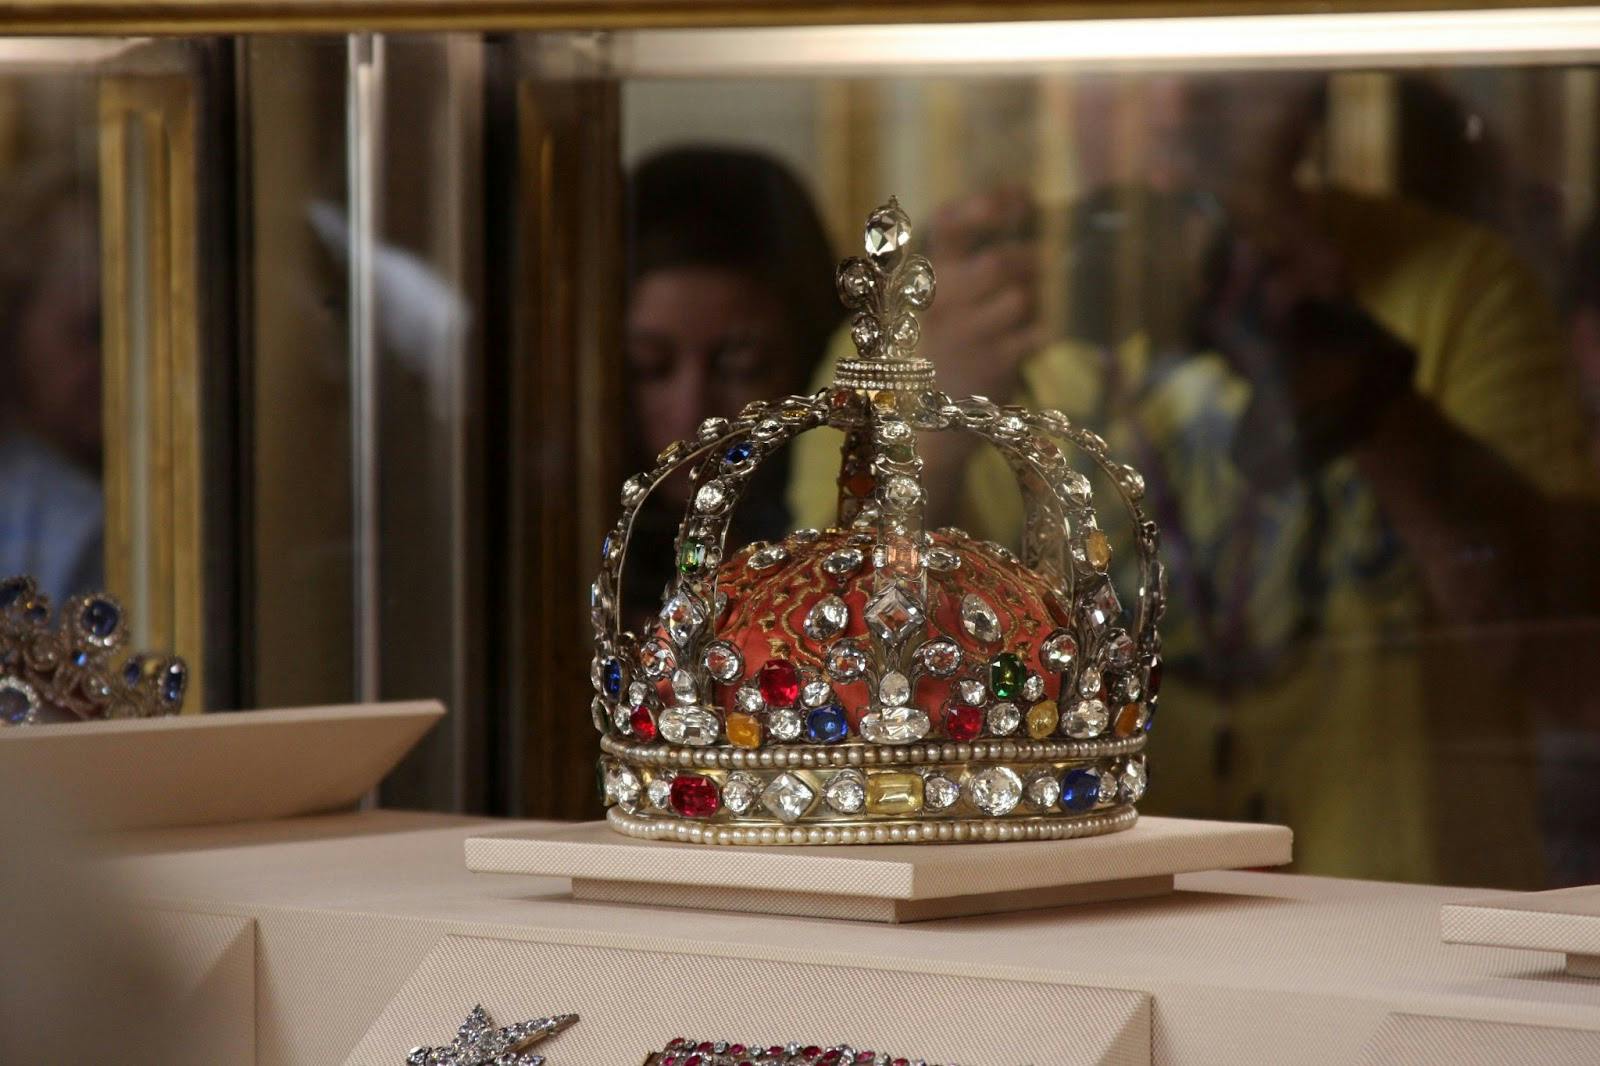 The Difference Between the British Crown Jewels and the Coronation Regalia